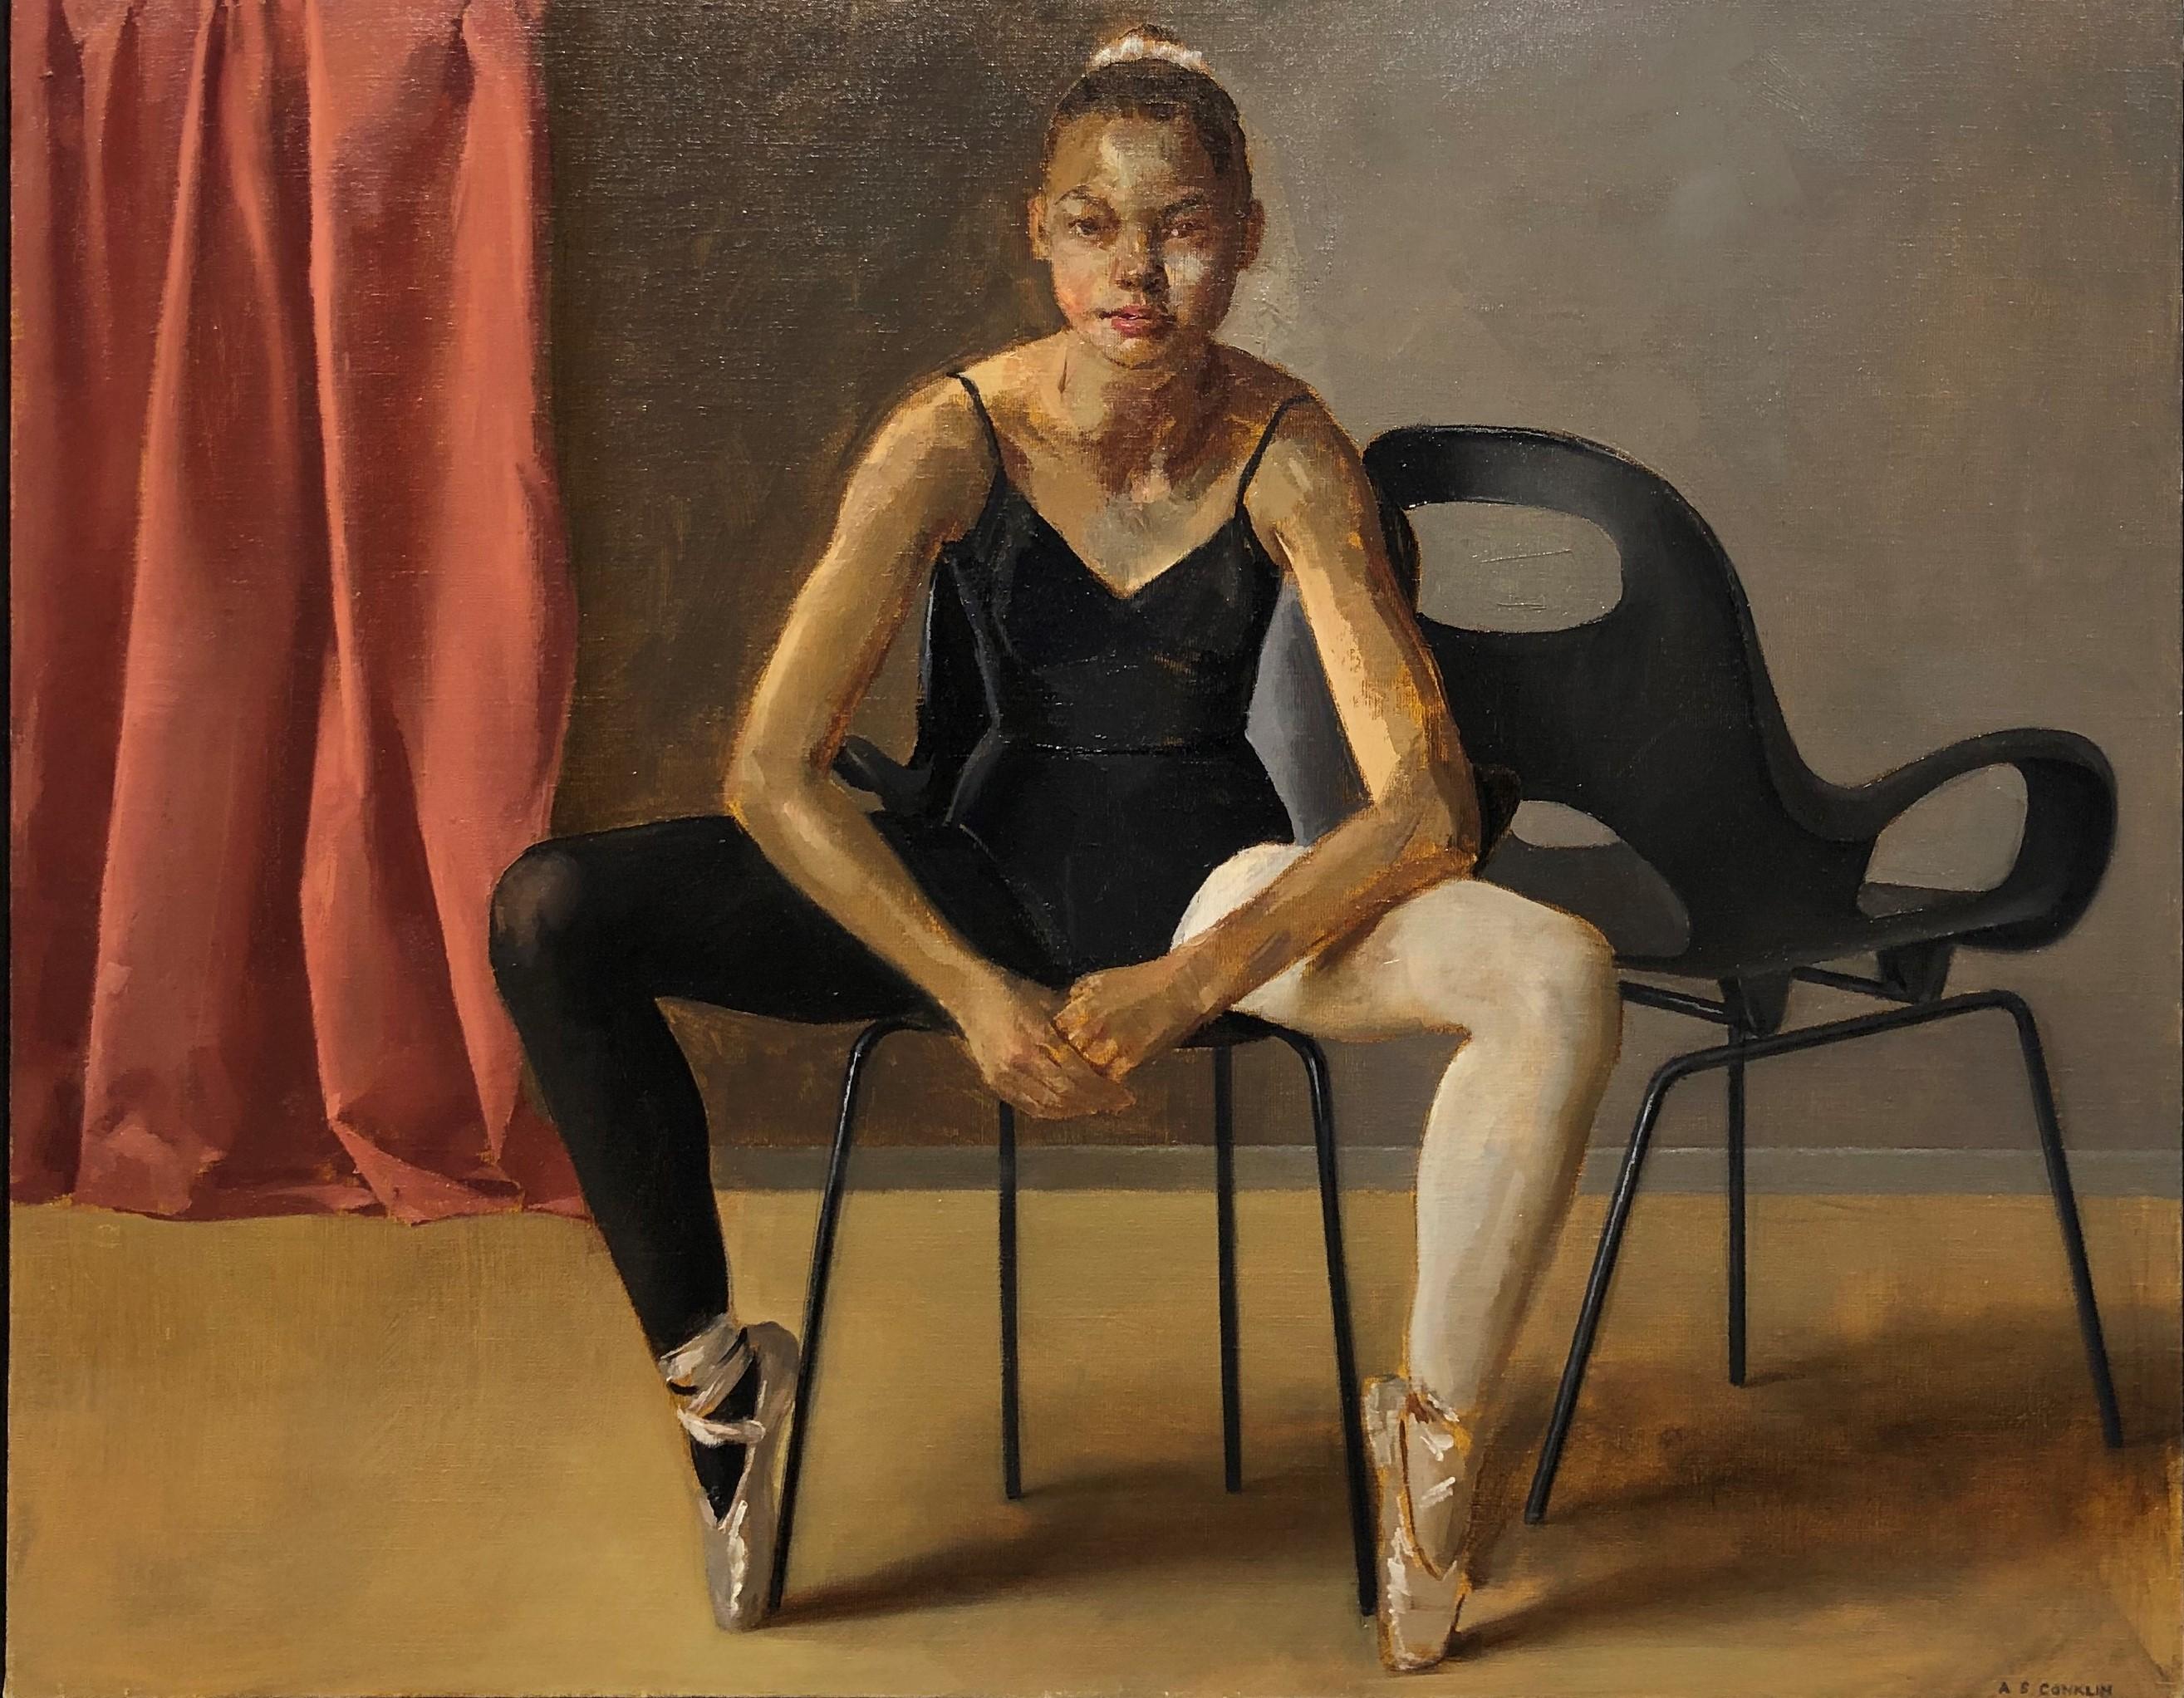 Andrew S. Conklin Interior Painting - August in Leotard Seated on Oh Chair, Female Dancer, Original Oil on Panel